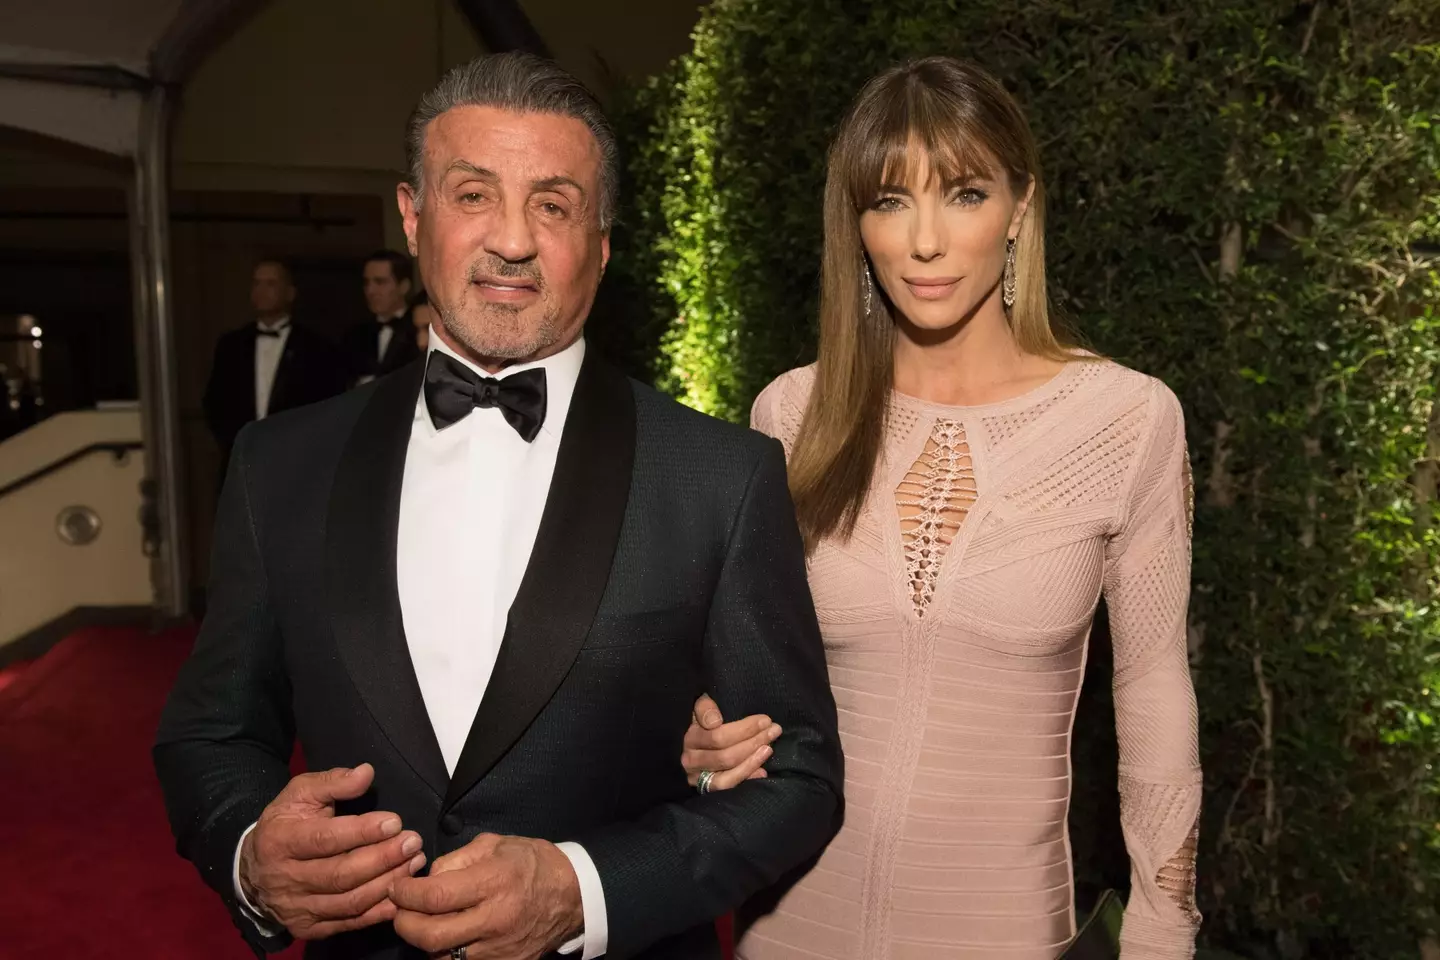 Stallone and Flavin recently celebrated their 25th wedding anniversary.